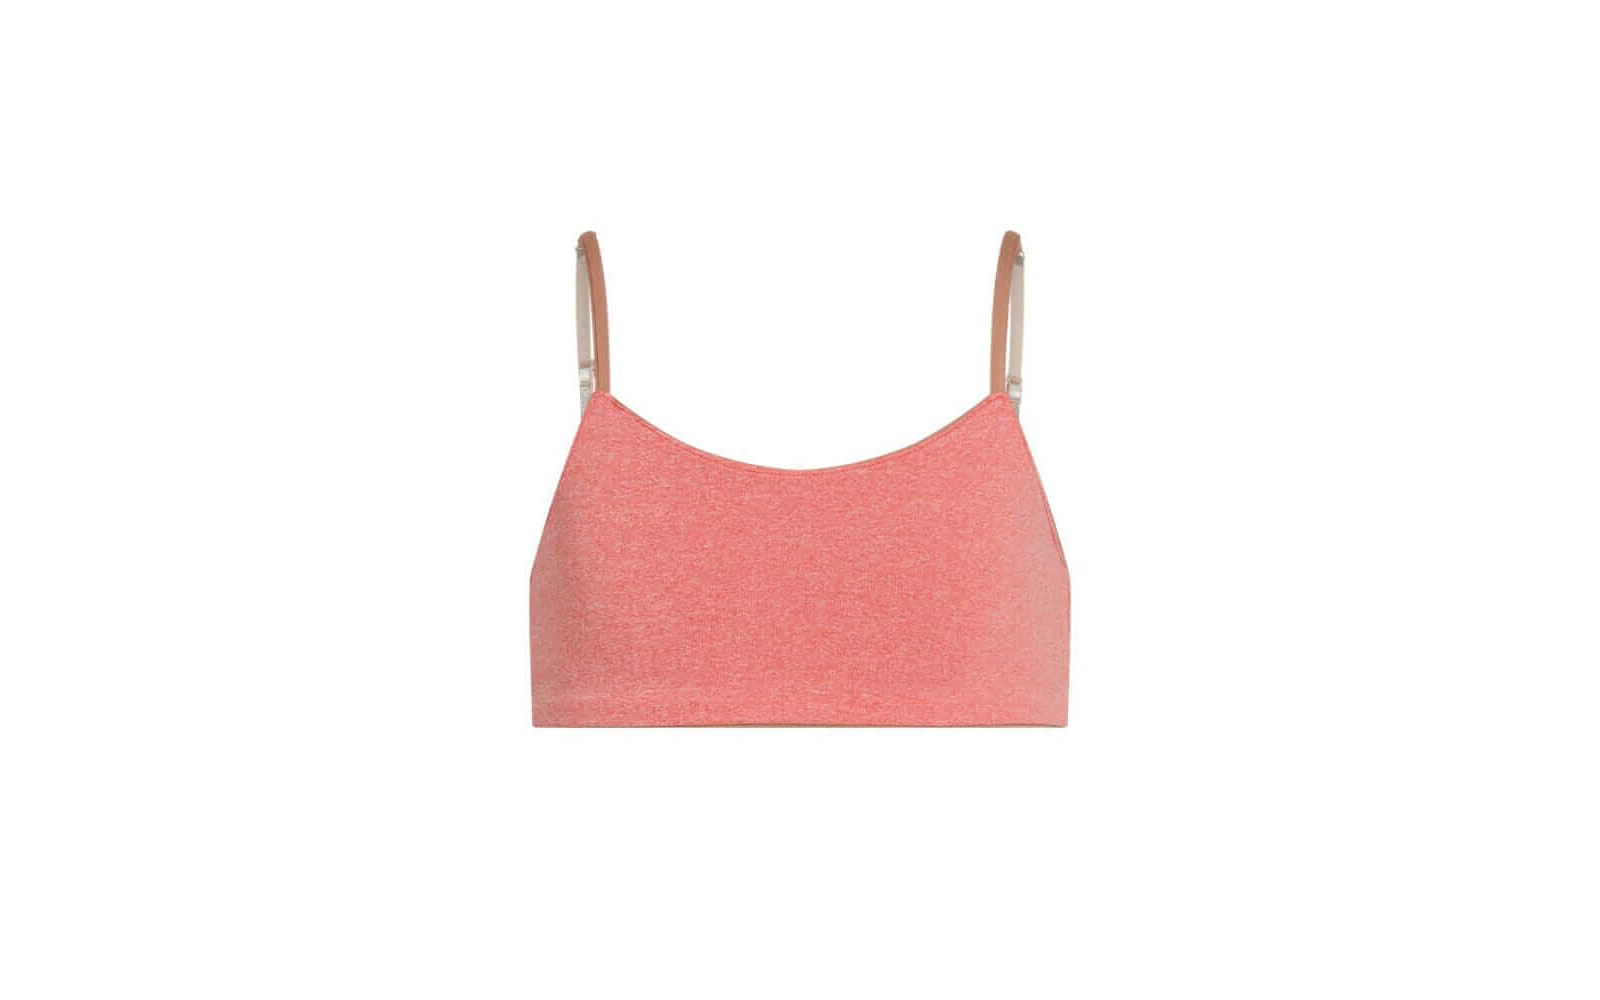 Bleuet sports bra for teens in persimmon color.